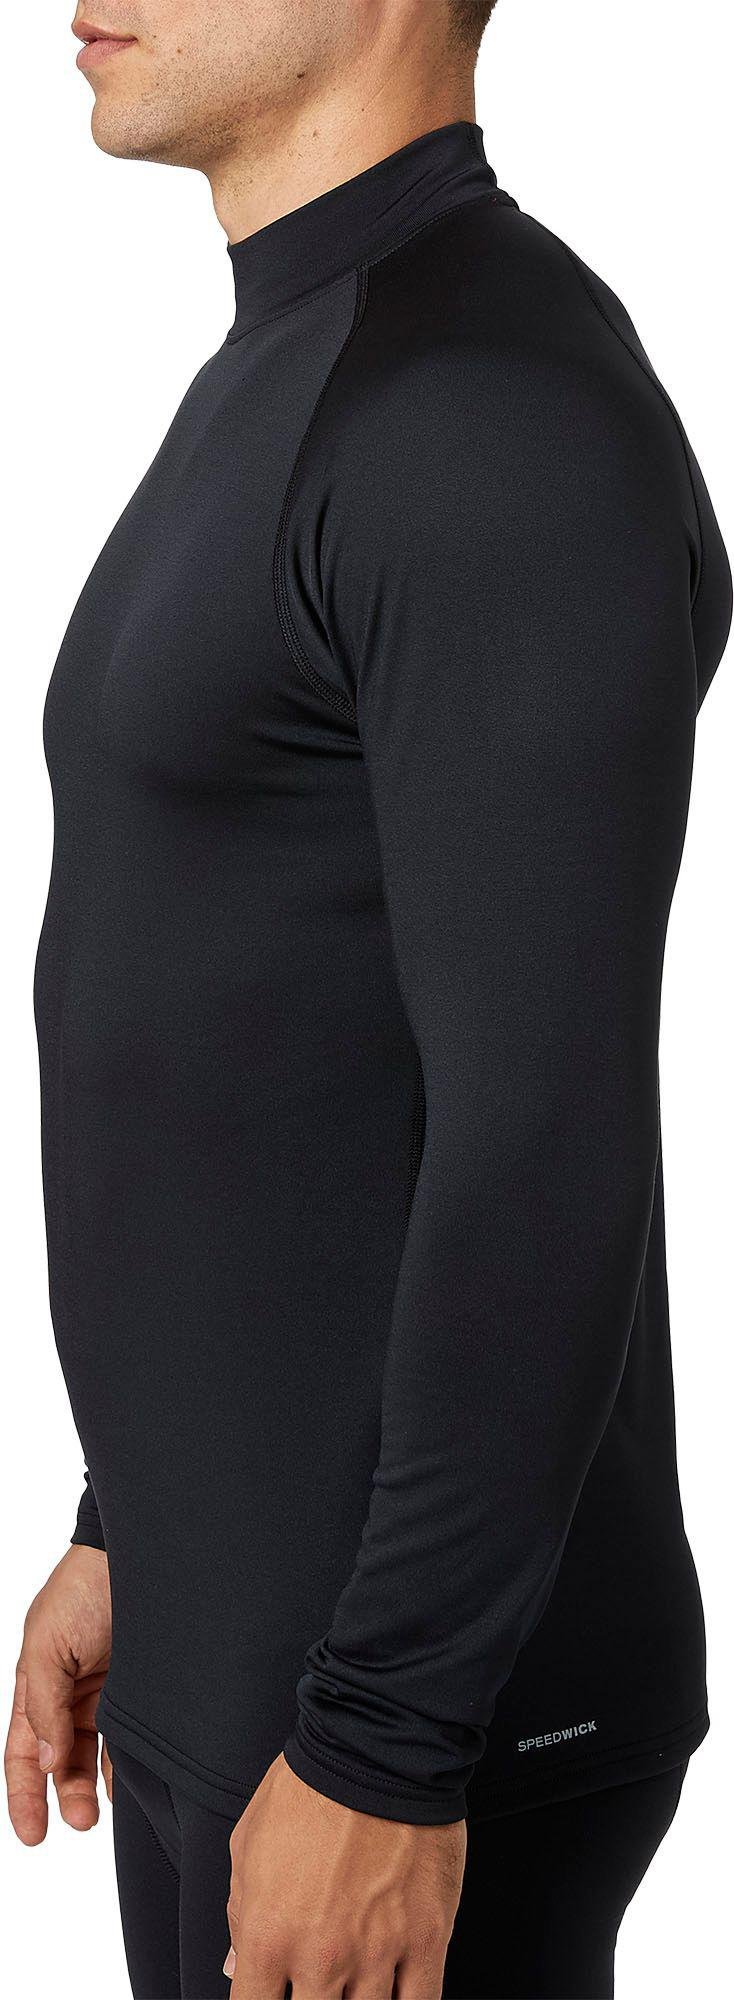 reebok cold weather compression shirt